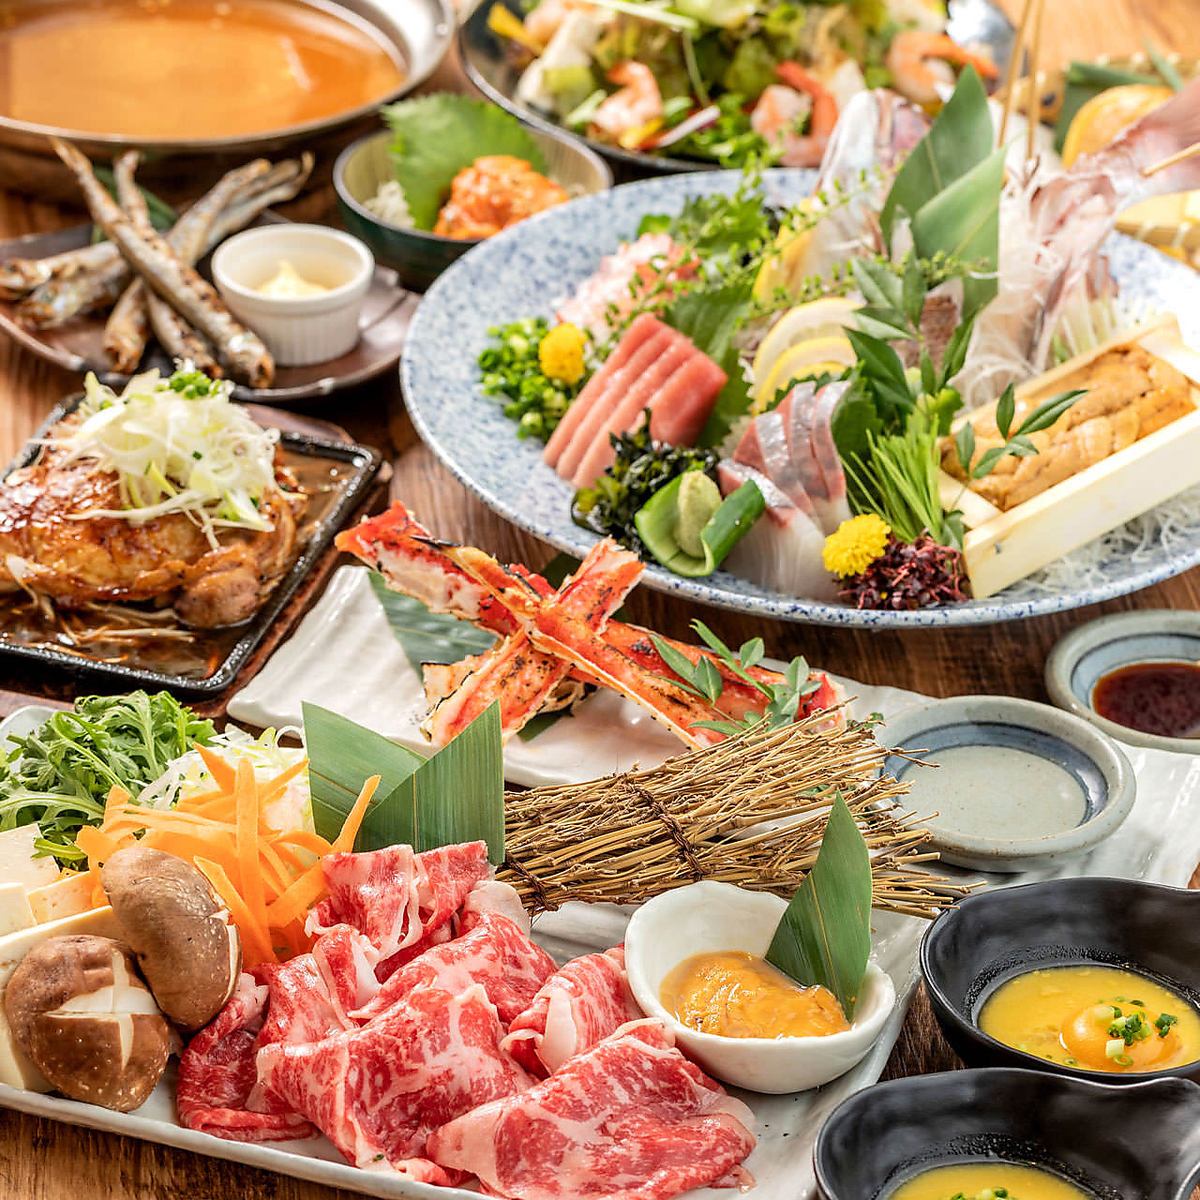 You can enjoy the finest meat x local cuisine and sake that you can enjoy by roasting!